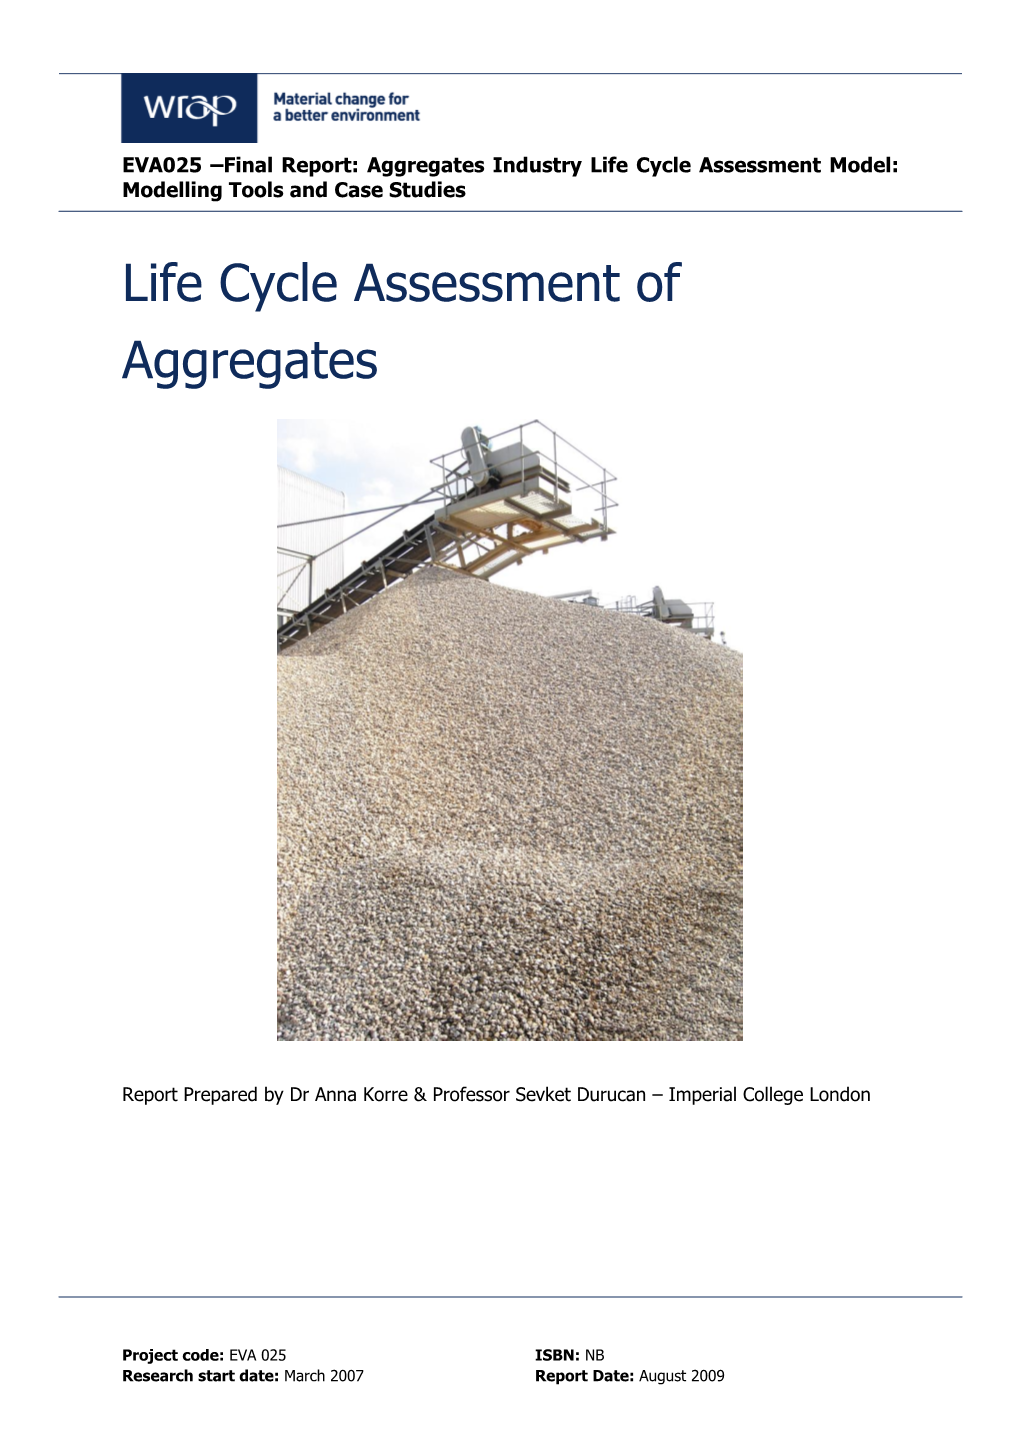 Life Cycle Assessment of Aggregates